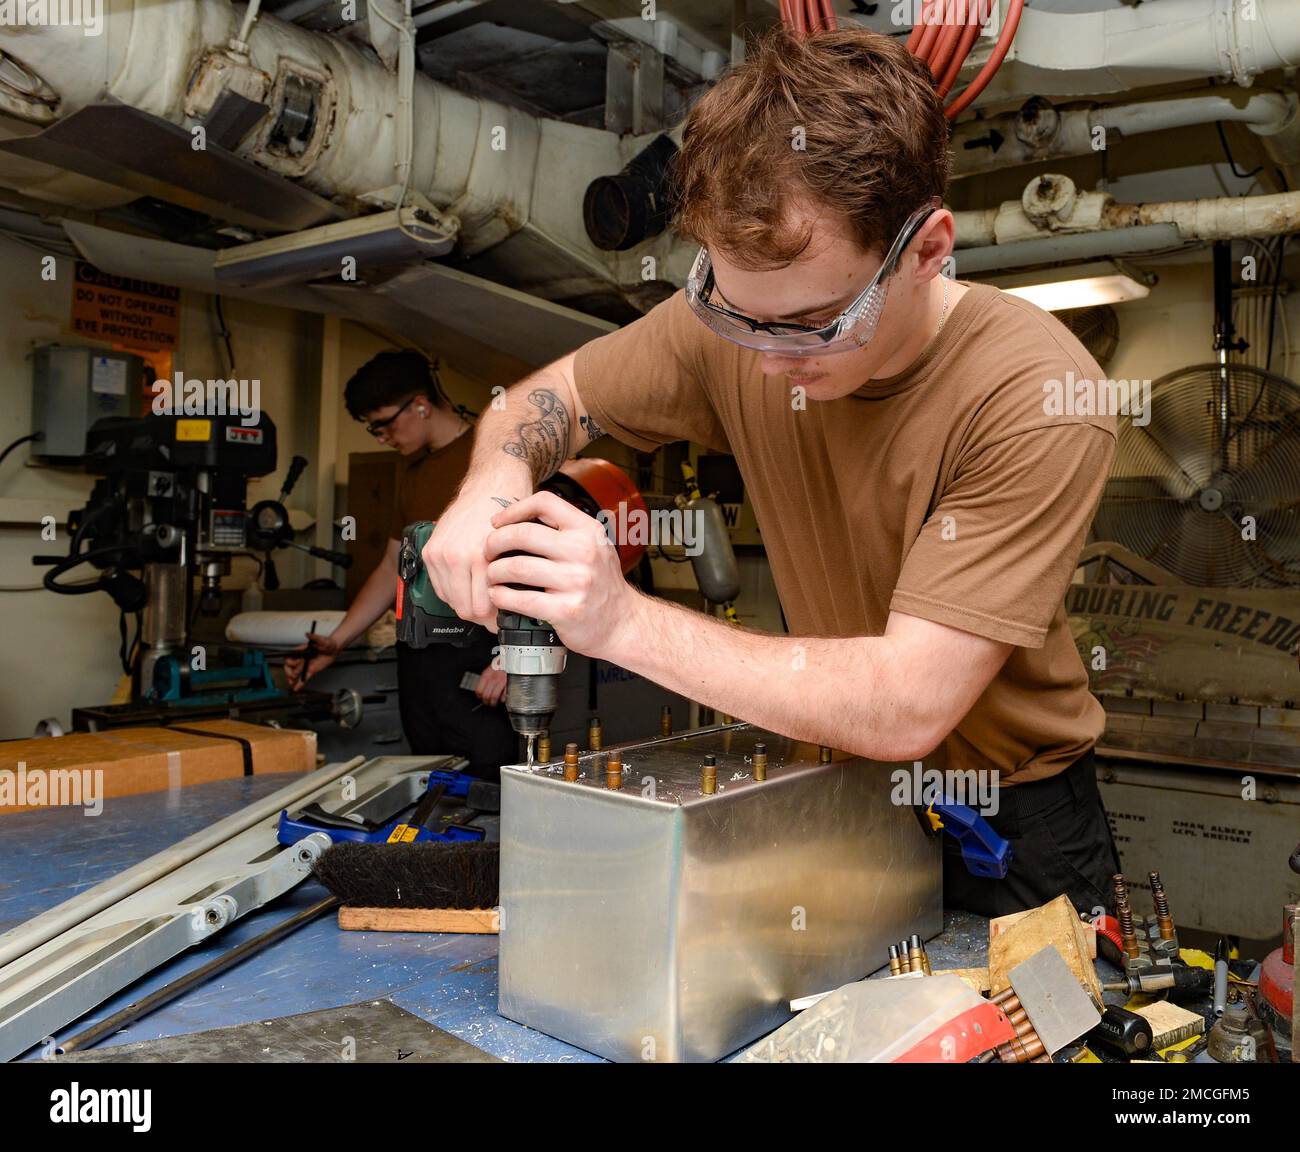 220701-N-FB730-1106 ADRIATIC SEA (July 1, 2022) Aviation Structural Mechanic Airman Steven Knight, from CHarlotte, North Carolina, drills a hole in a trash can cover for an on-the-job qualification project in the jet shop aboard the USS Harry S. Truman (CVN 75), July 1, 2022. The Harry S. Truman Carrier Strike Group is on a scheduled deployment in the U.S. Naval Forces Europe area of operations, employed by U.S. Sixth Fleet to defend U.S., allied and partner interests. Stock Photo